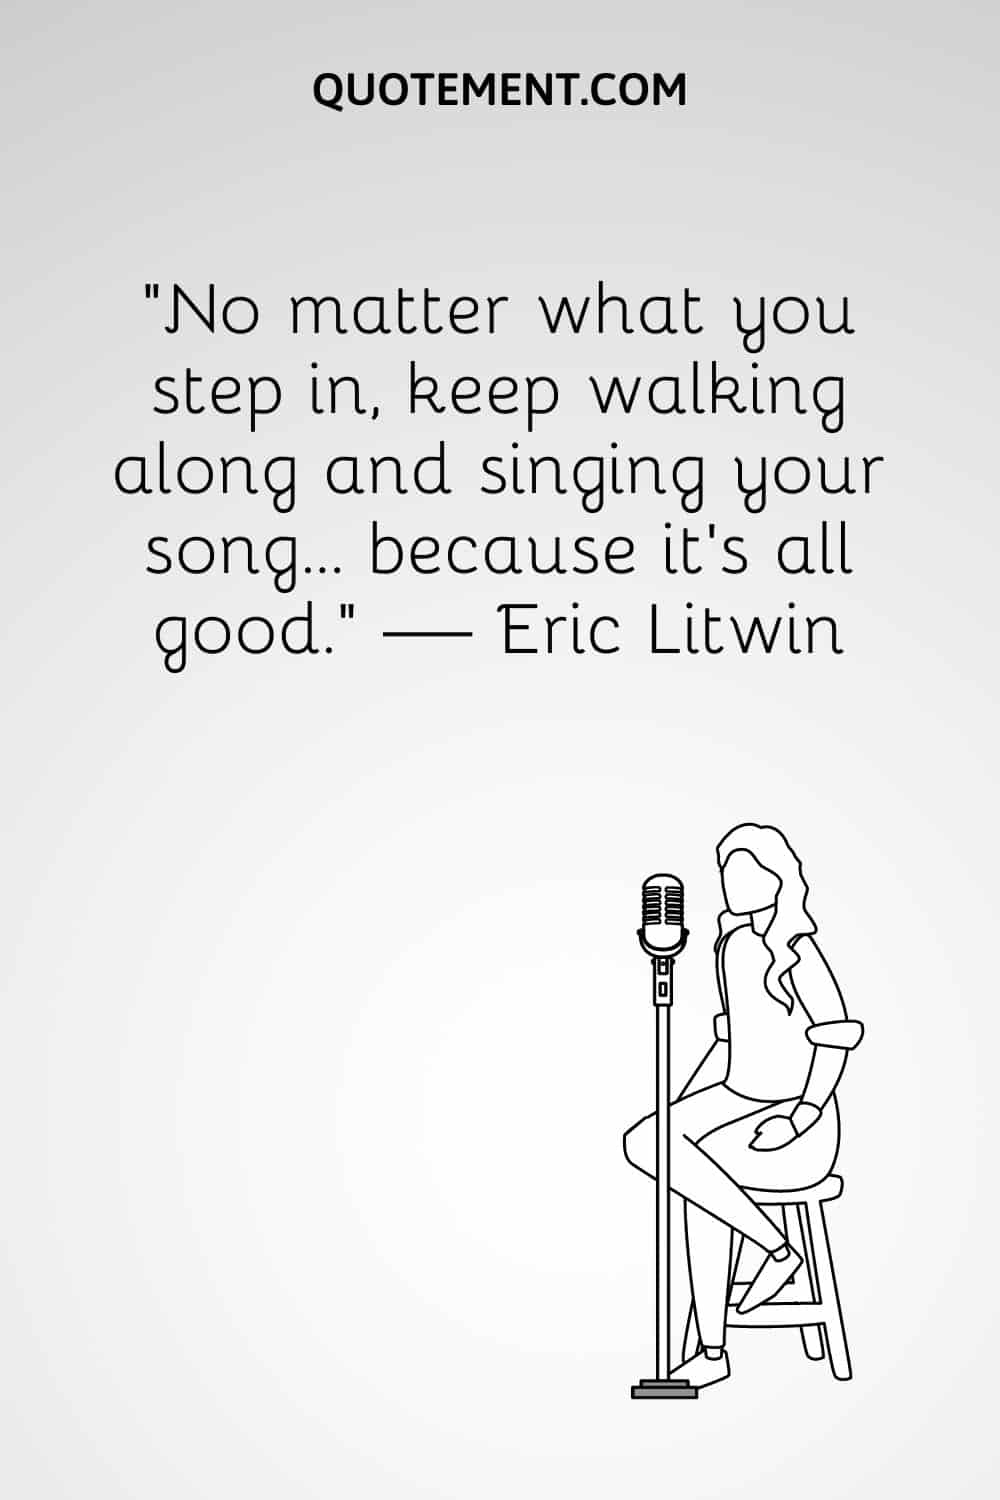 “No matter what you step in, keep walking along and singing your song... because it’s all good.” — Eric Litwin